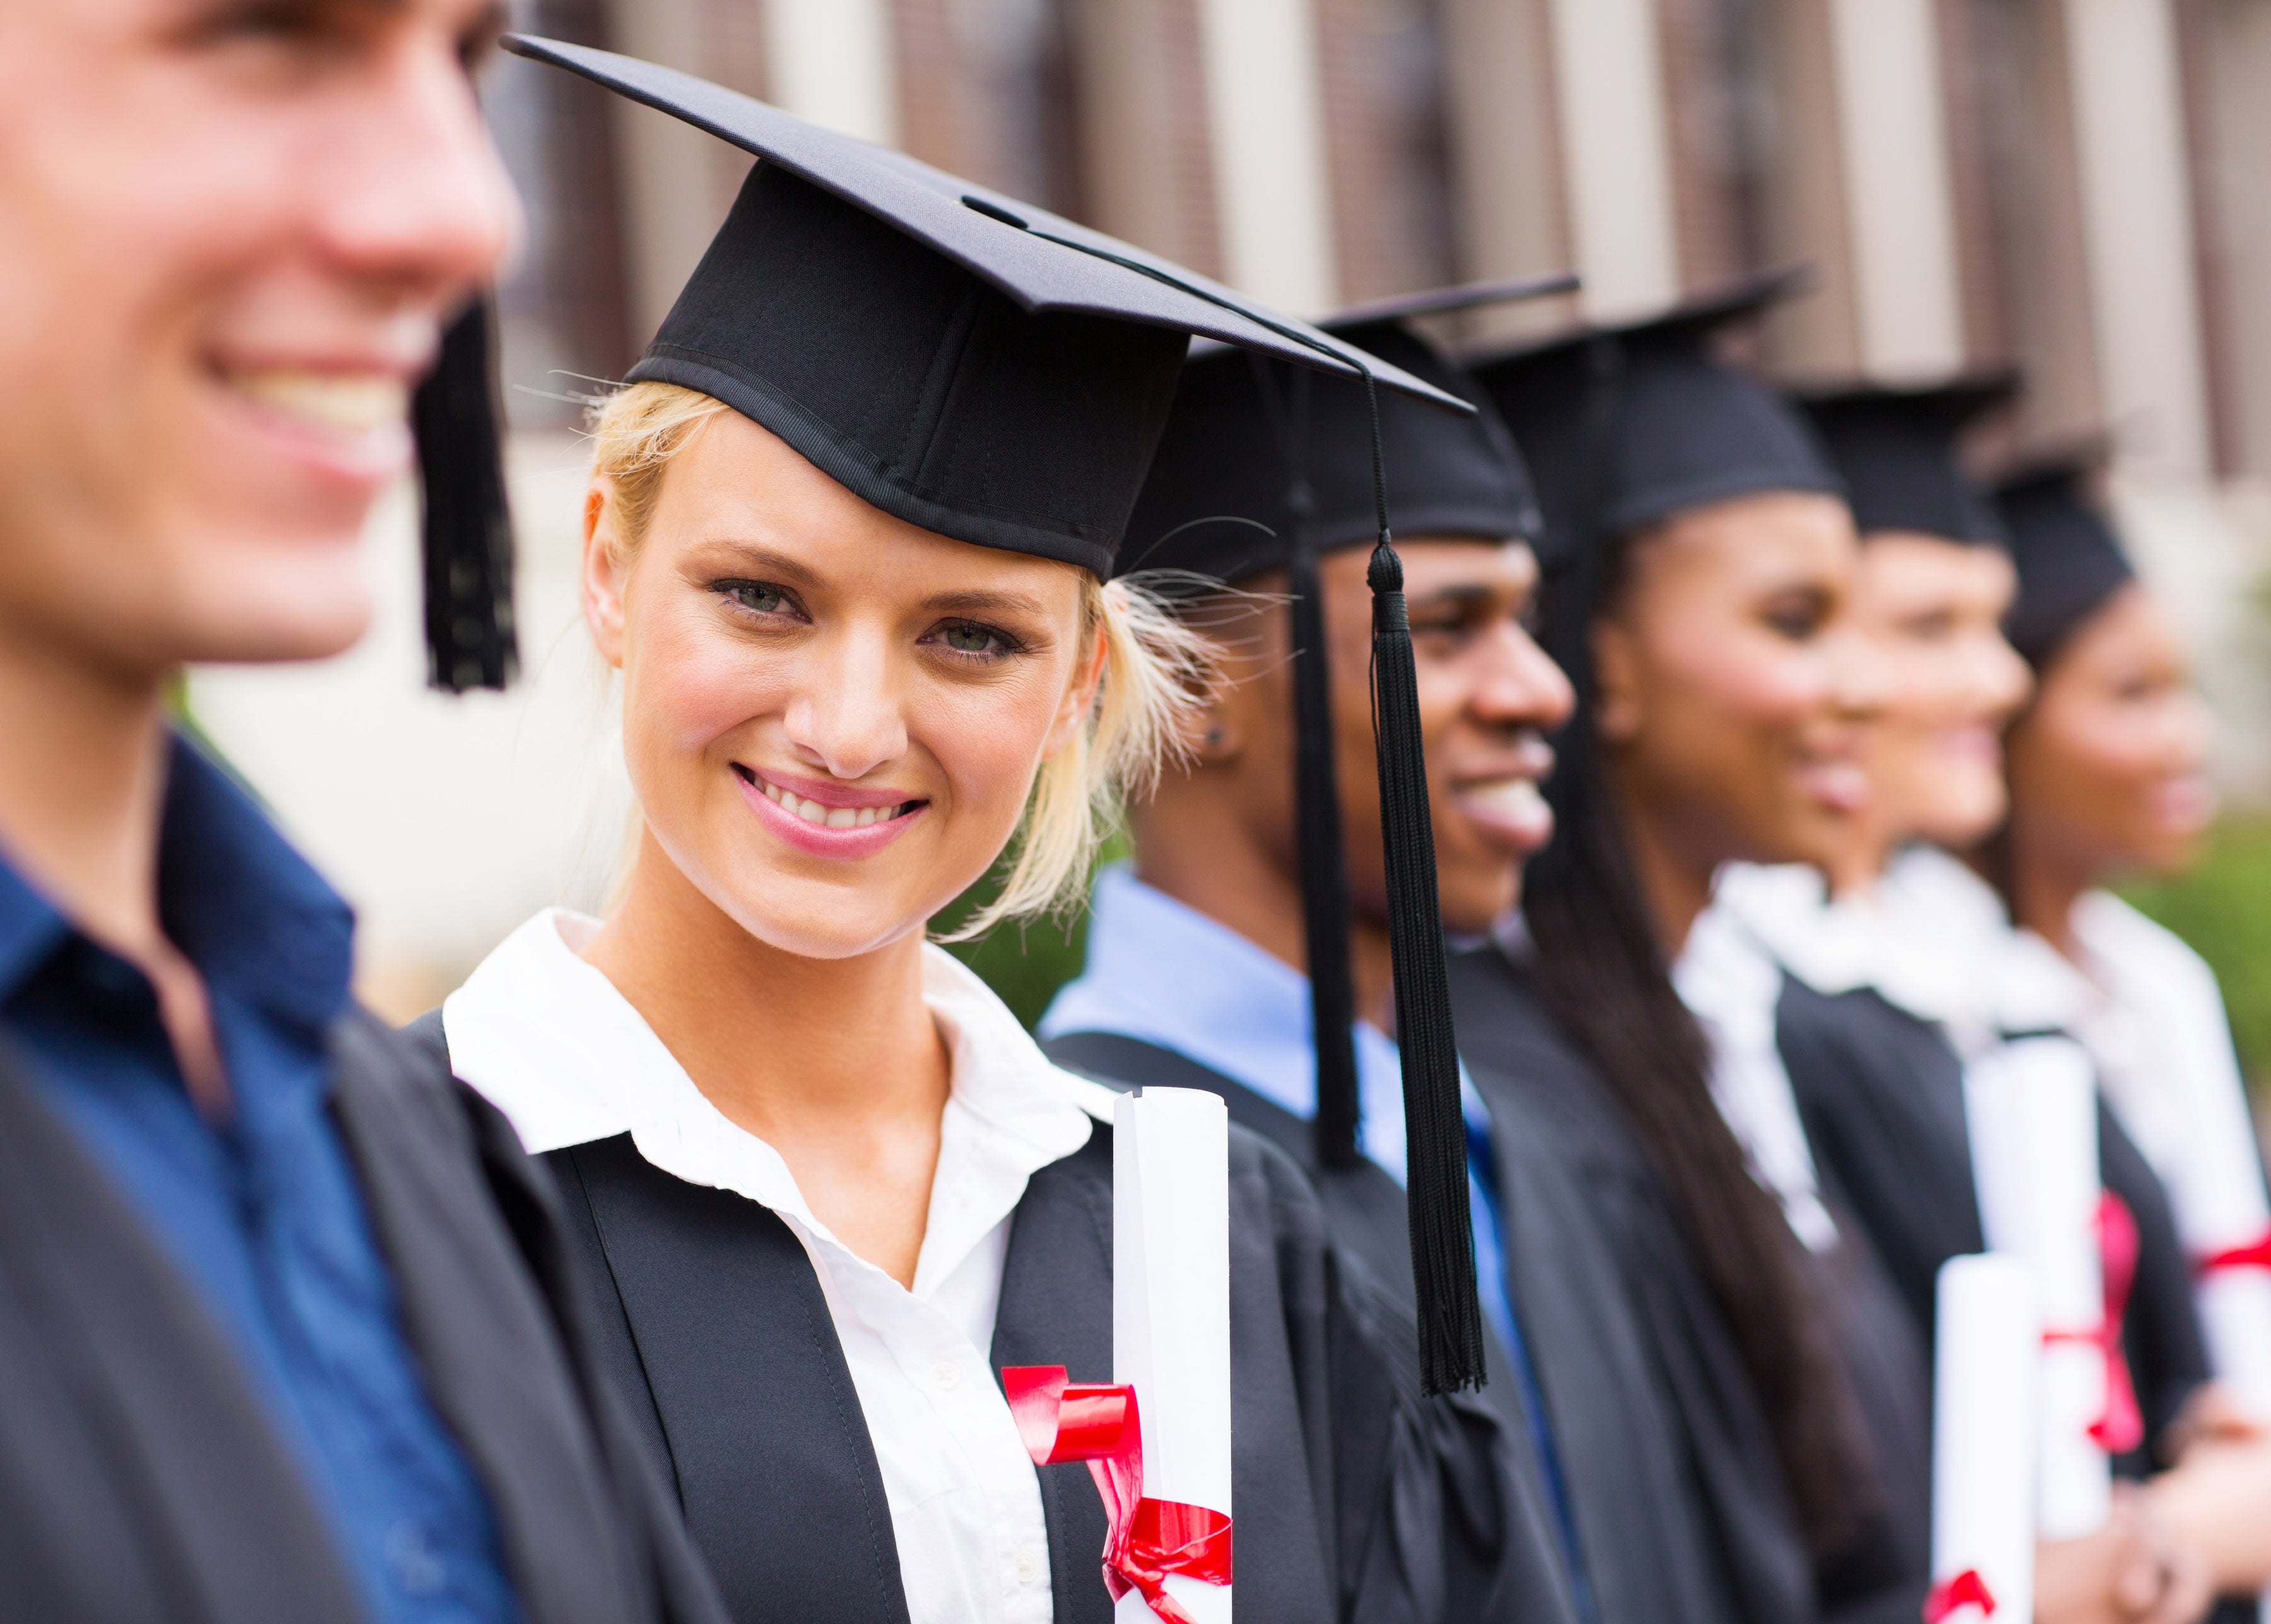 Woman in graduation cap smiles while holding diploma